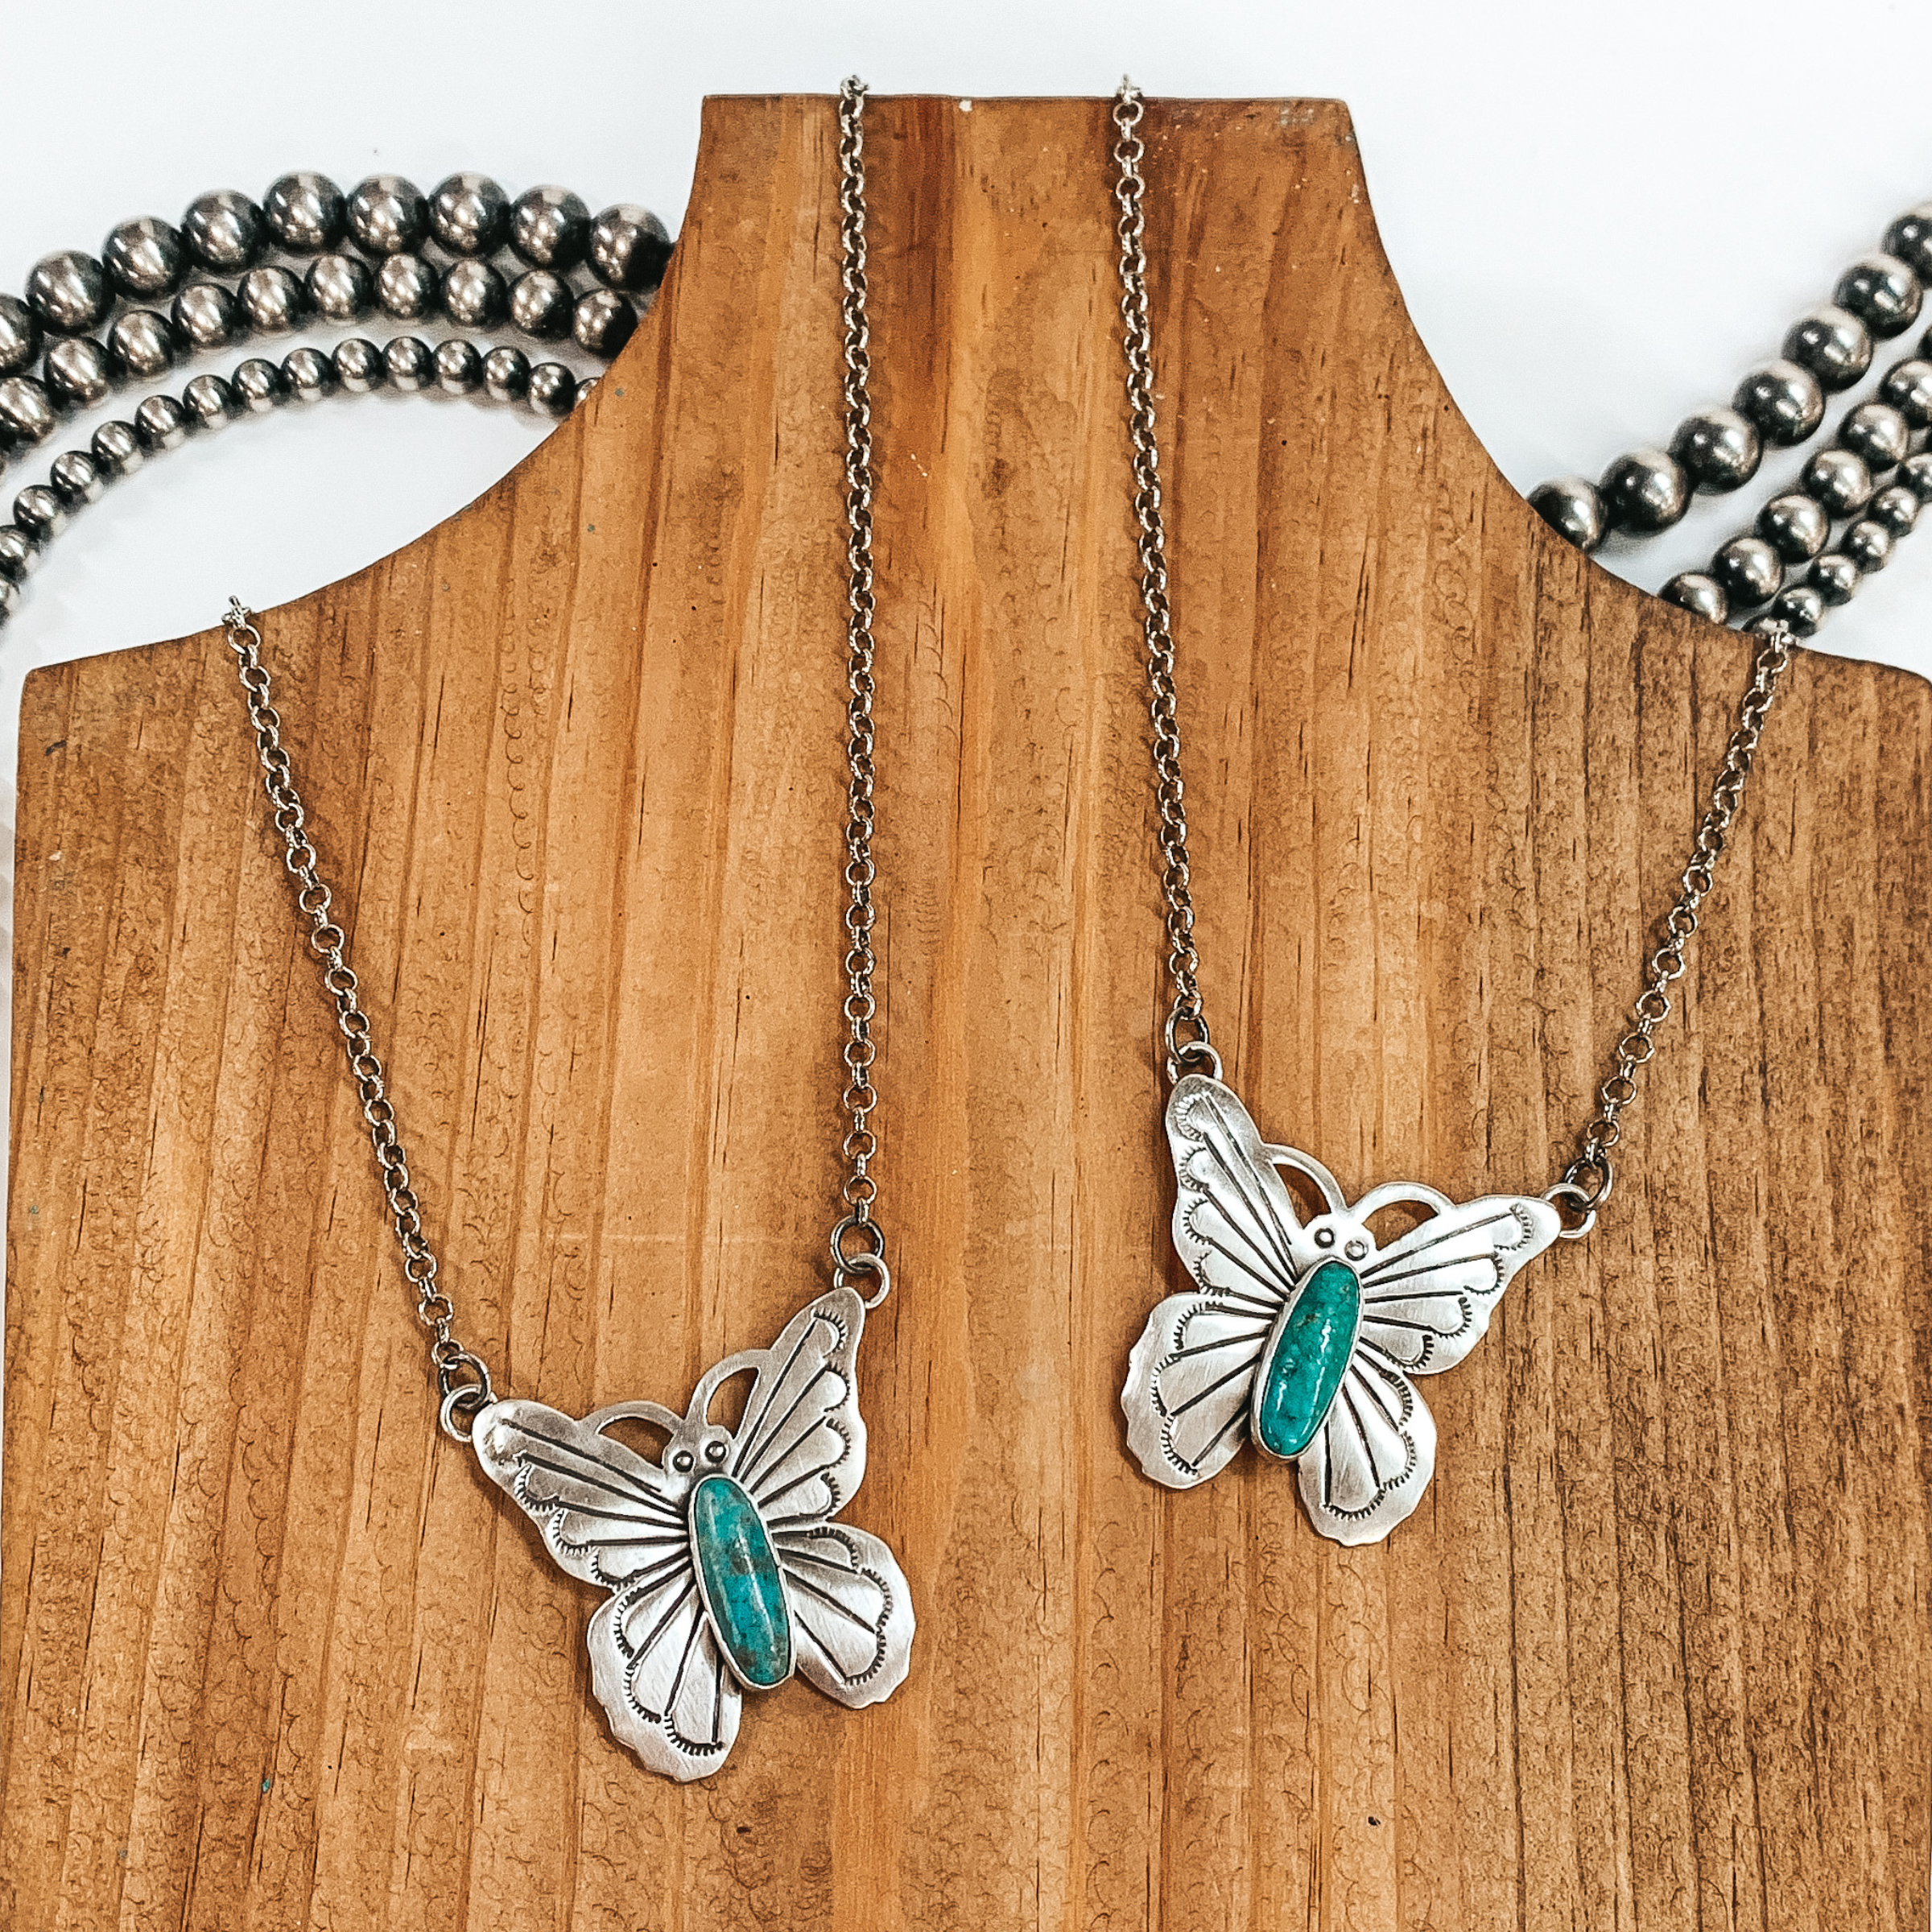 Two silver chain necklaces with a silver butterfly pendant. The pendant includes an engraved design and a center turquoise stone. These necklaces are pictured on a wooden necklace holder on a white background. 